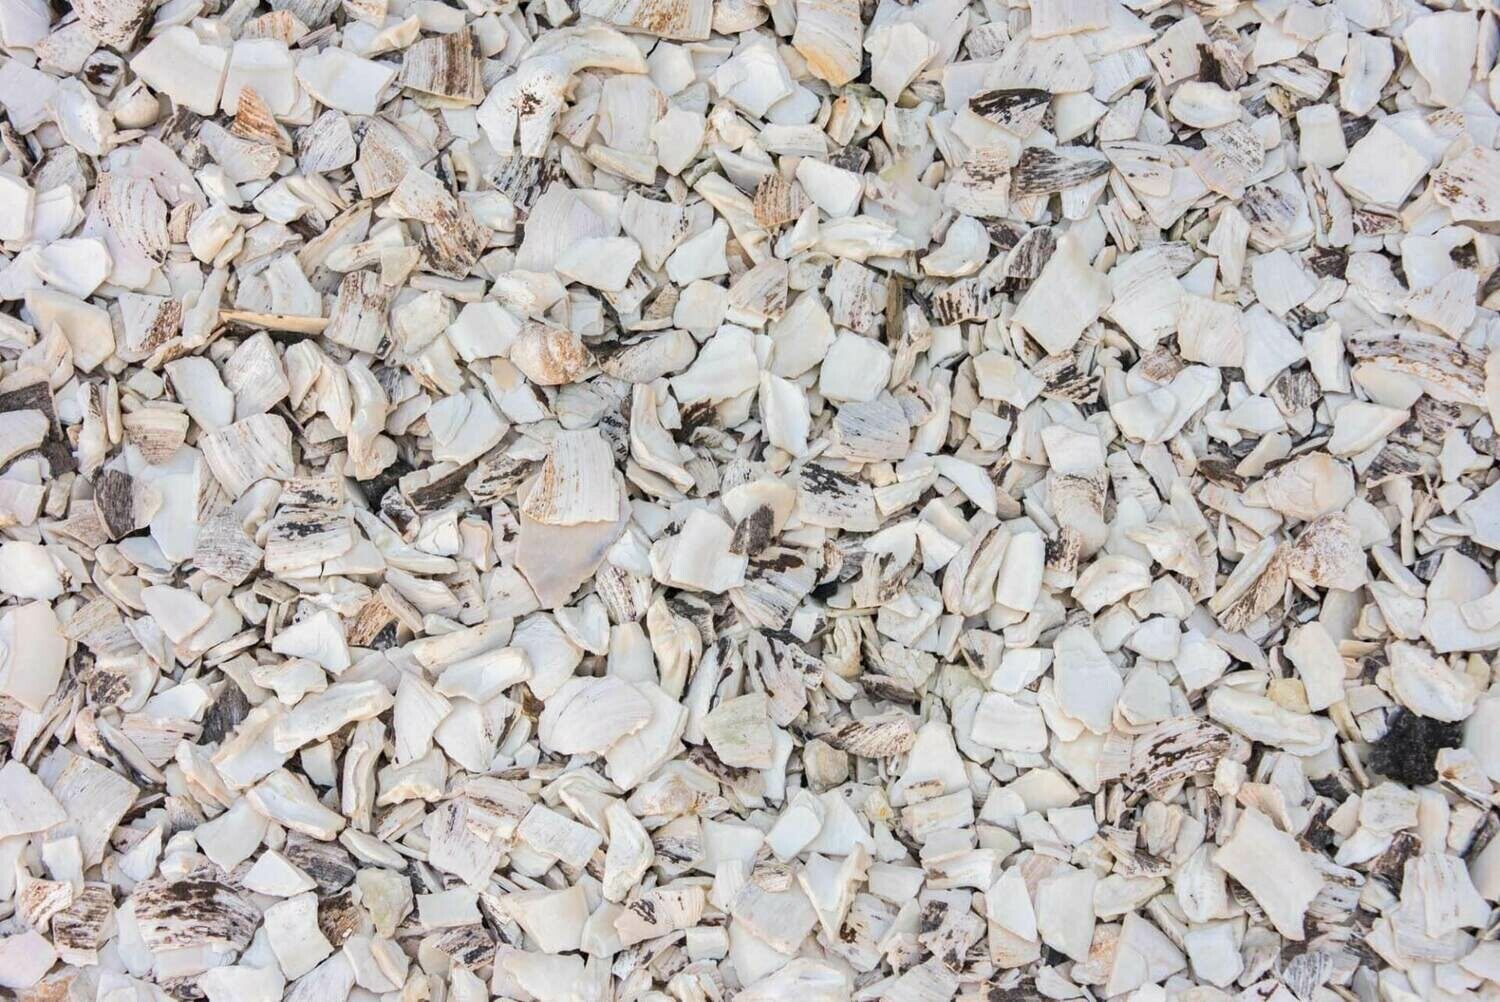 Where To Buy Crushed Shells For Landscaping Near Me